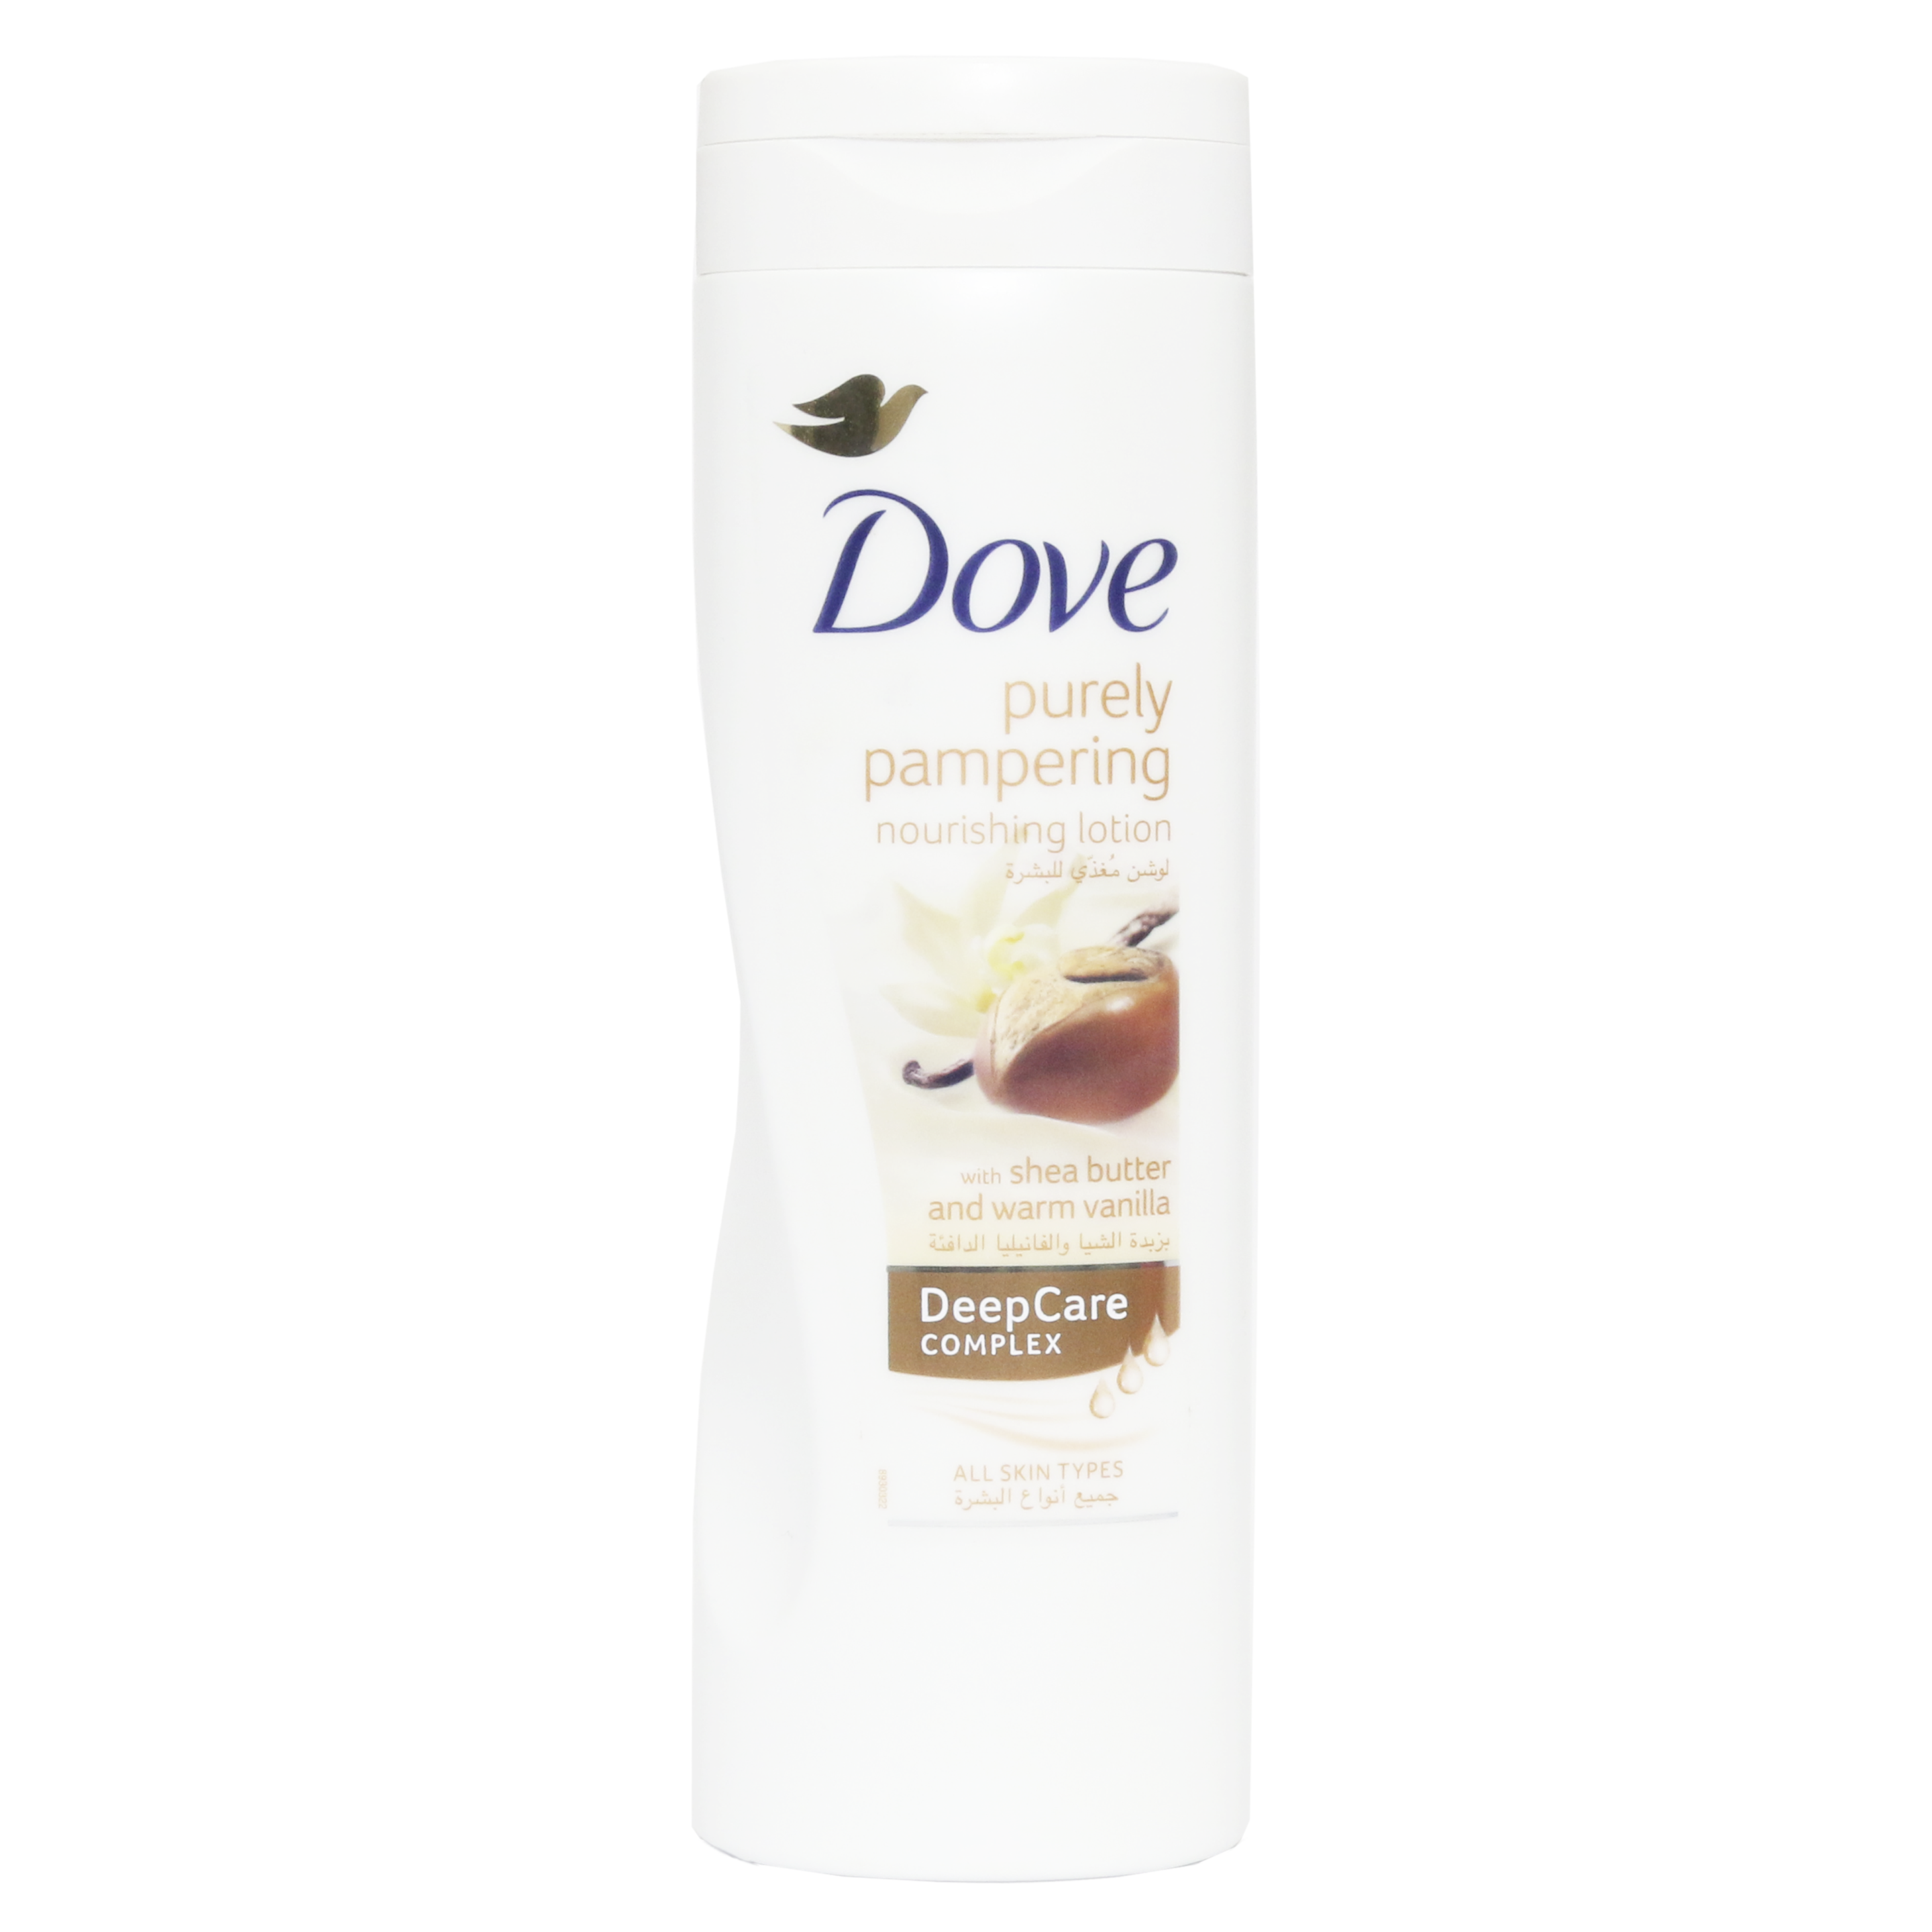 Dove Purely Pampering Shea Butter and Warm Vanilla Nourishing Lotion 400ml